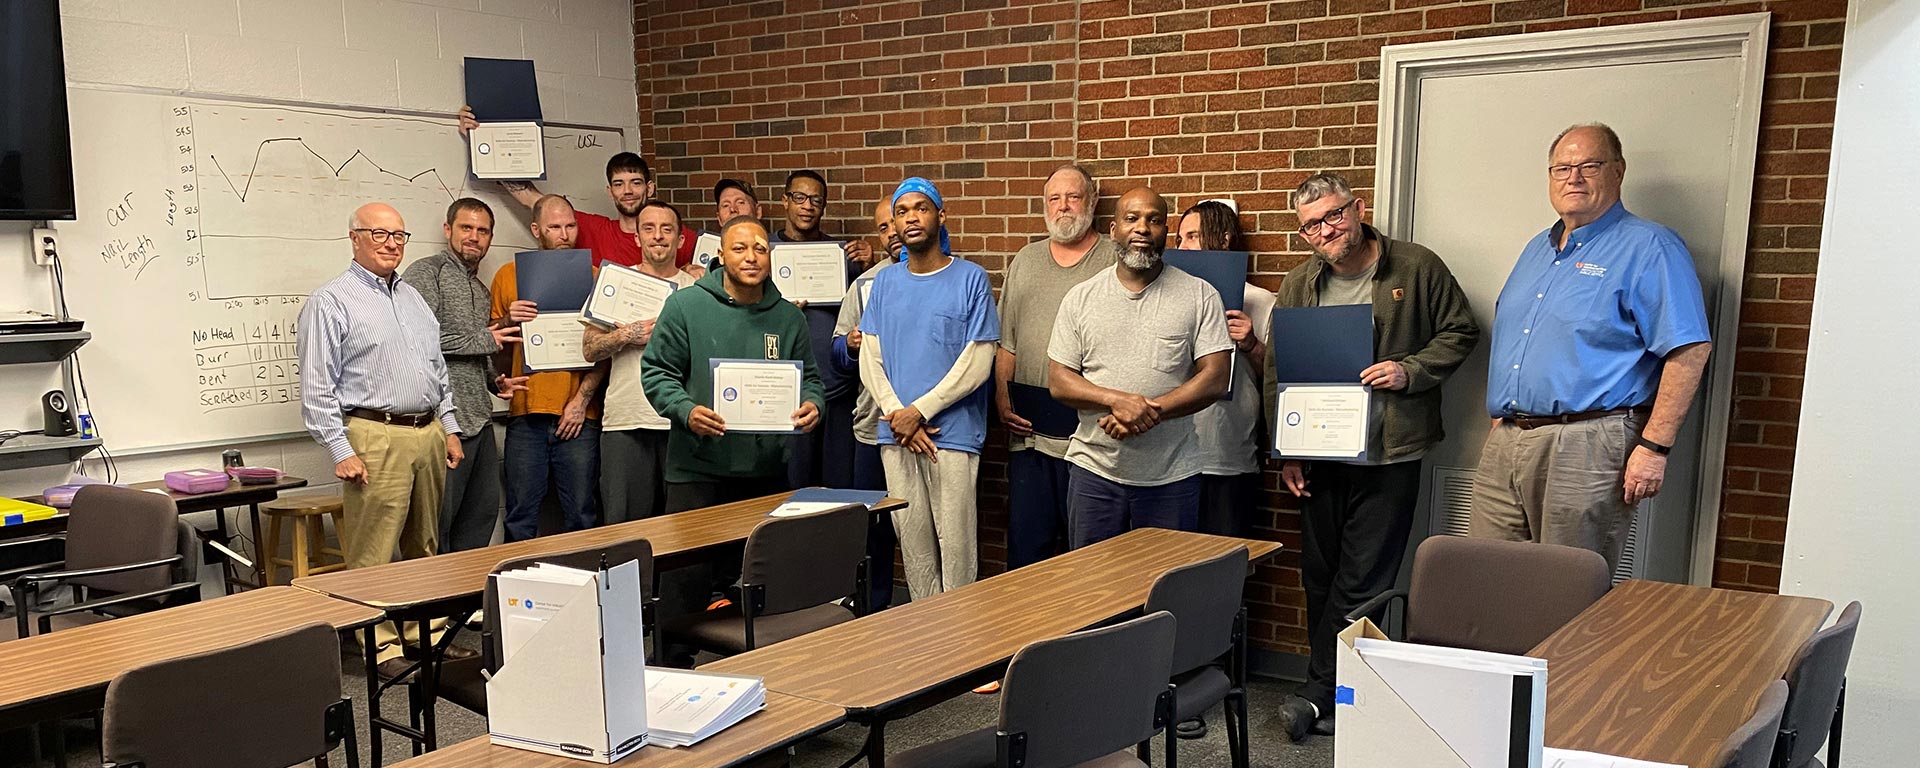 CIS Training Consultant Keith Groves, far right, led some of the manufacturing skills training in the Dyer County jail.